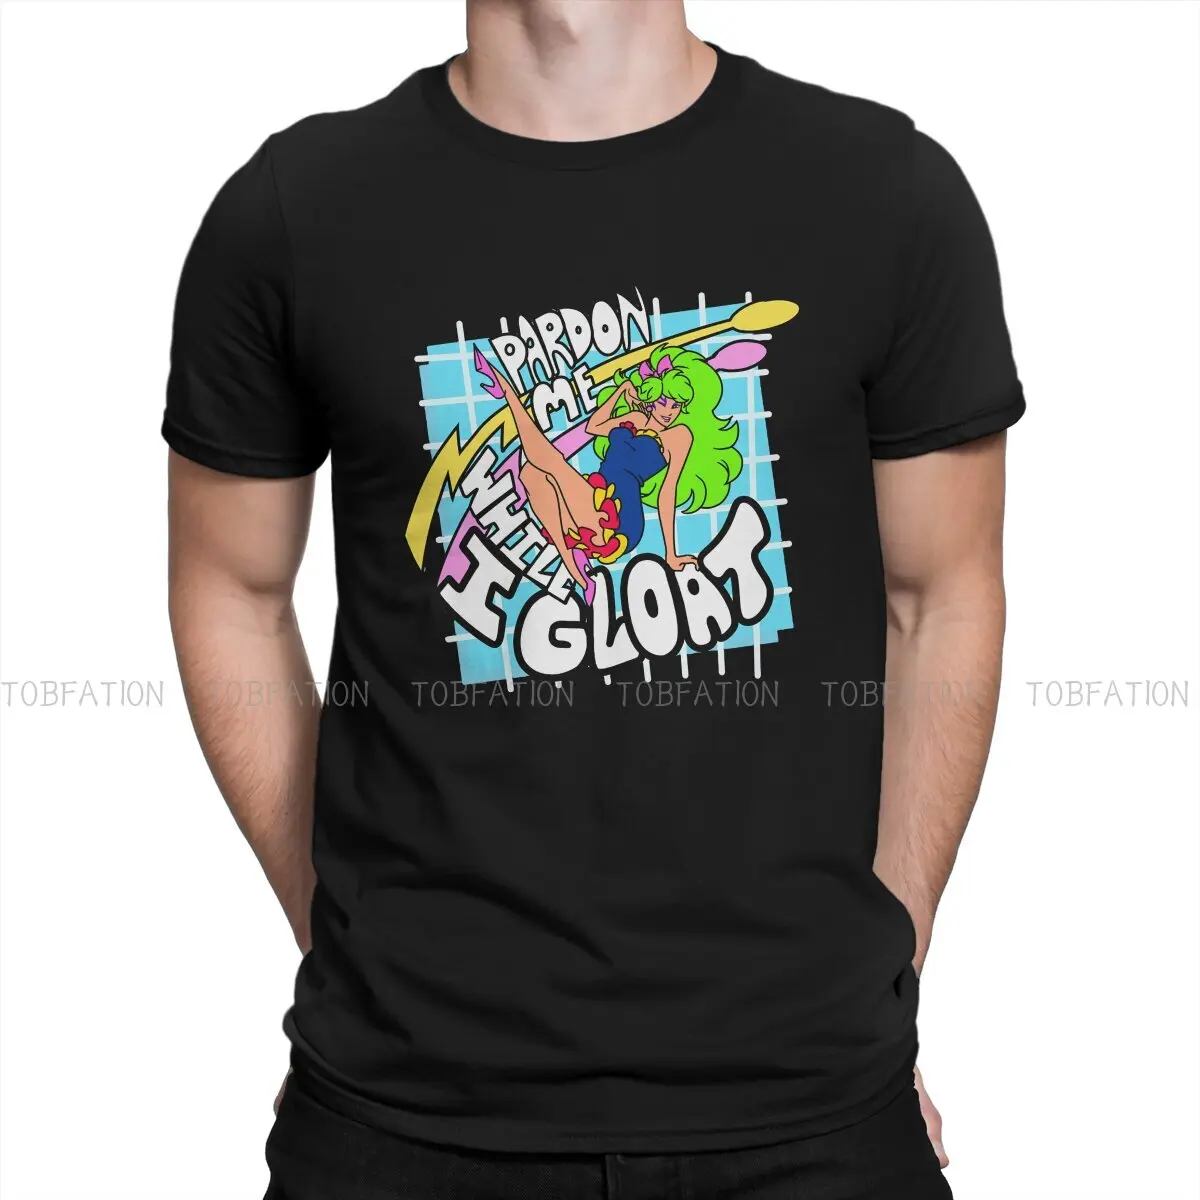 Pardon Me While I Gloat Classic Man's TShirt Jem And The Holograms TV O Neck Tops 100% Cotton T Shirt High Quality Gift Idea